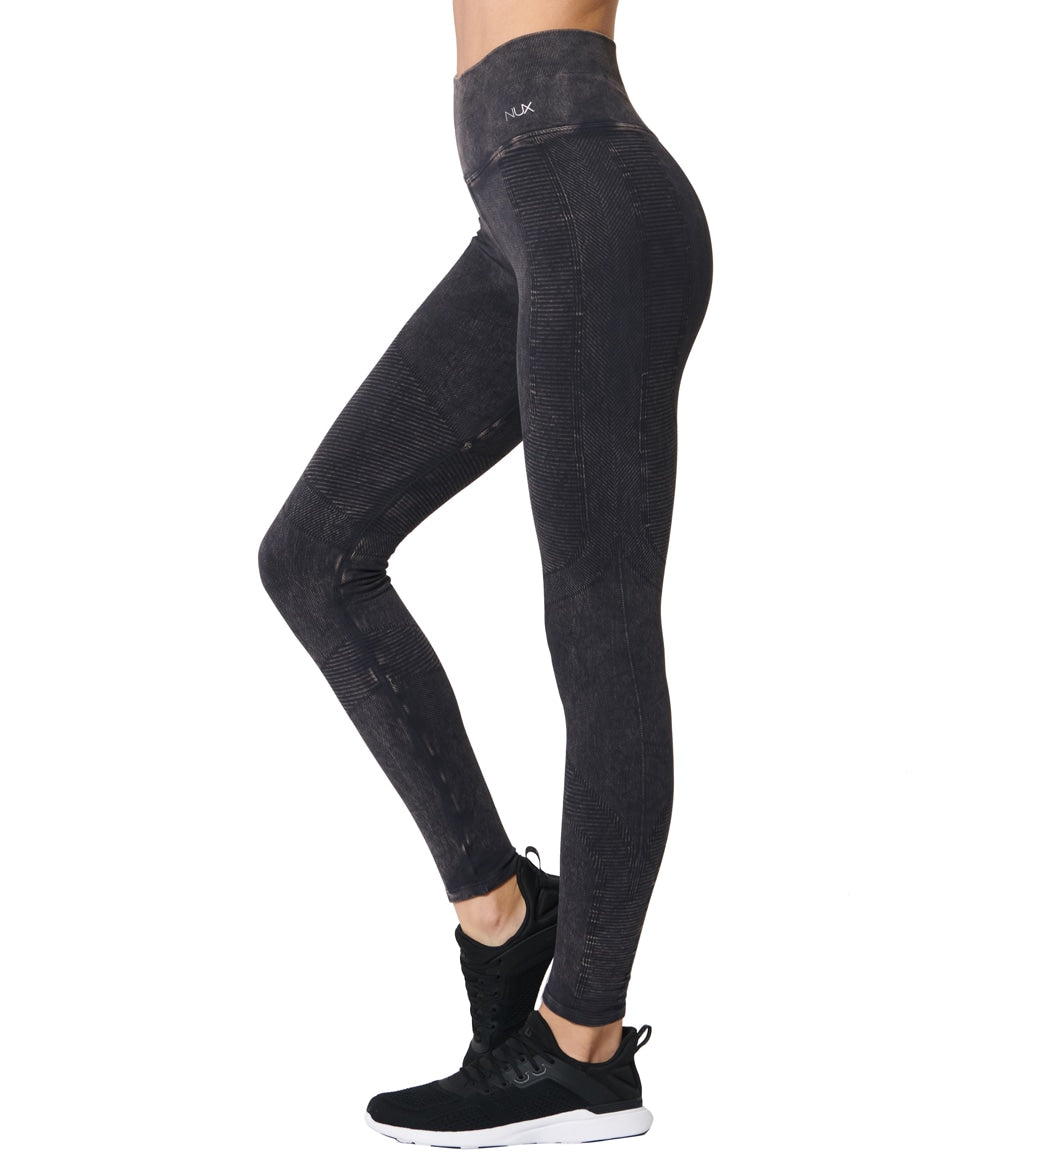 NUX One by One Mineral Wash Leggings